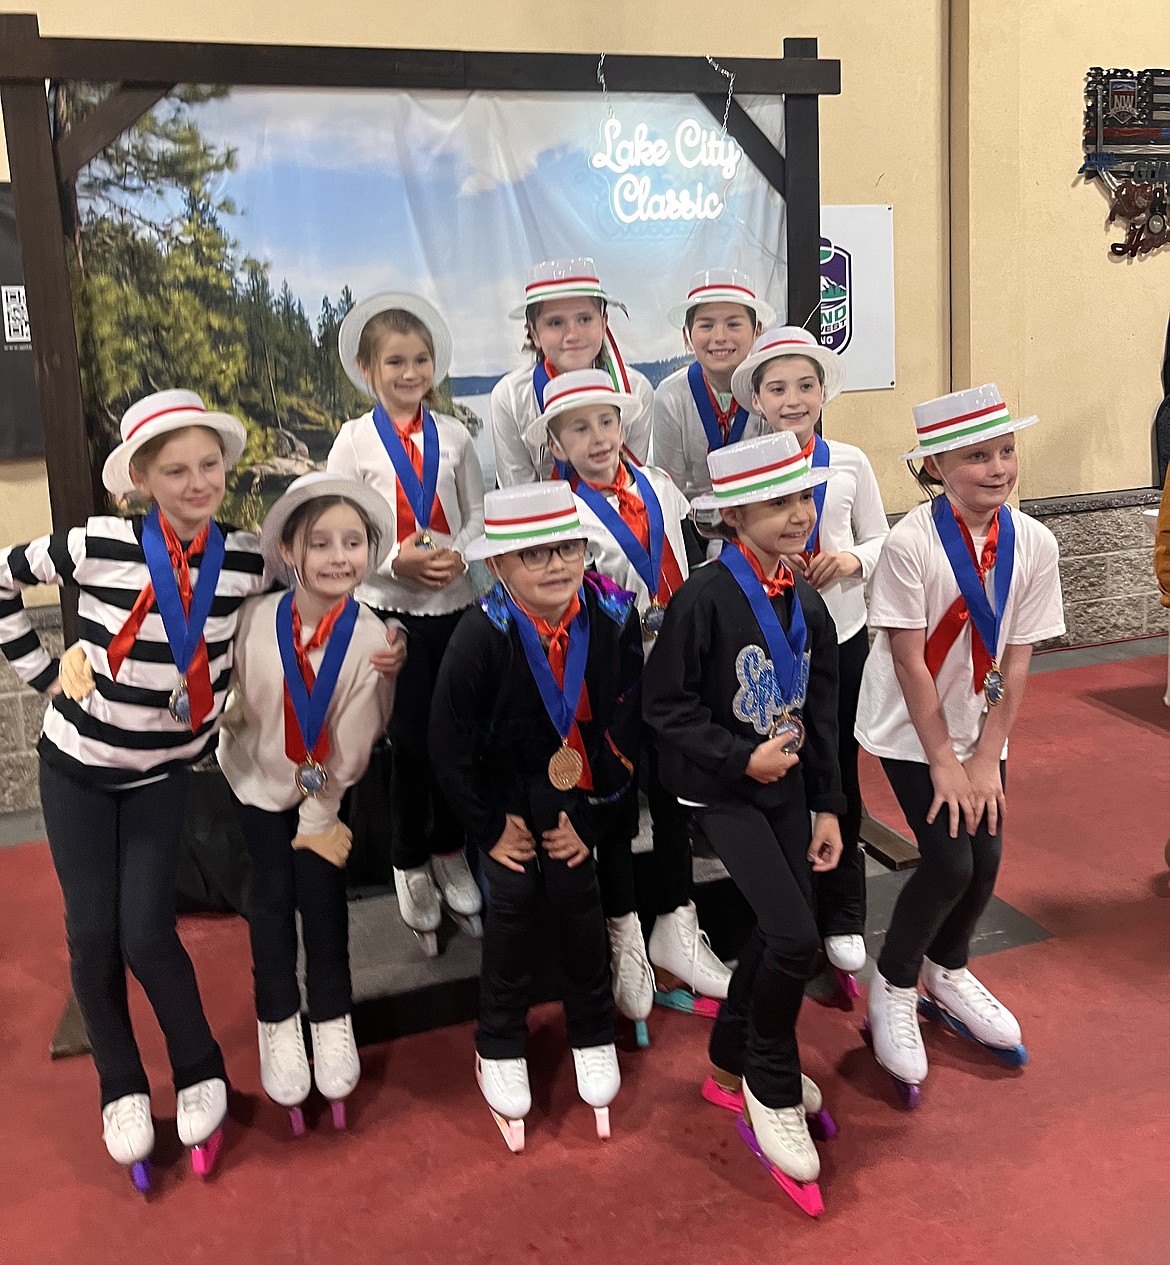 Courtesy photo 
The Shooting Stars, Theatre on Ice. In the front row from left are Brynna Sommer, Katherine De La Rosa, Ivy Barkley, Paisley Kelley and Kaley Nelson; second row from left, Annika Wallace and Chloe Glass; and back row from left, Felicity Scott, Ella Perry and Constance Scott. All are part of the Lake City Figure Skating program of the Spokane Figure Skating Club, which hosted the Lake City Classic on May 17-19 at the Frontier Ice Arena in Coeur d'Alene.